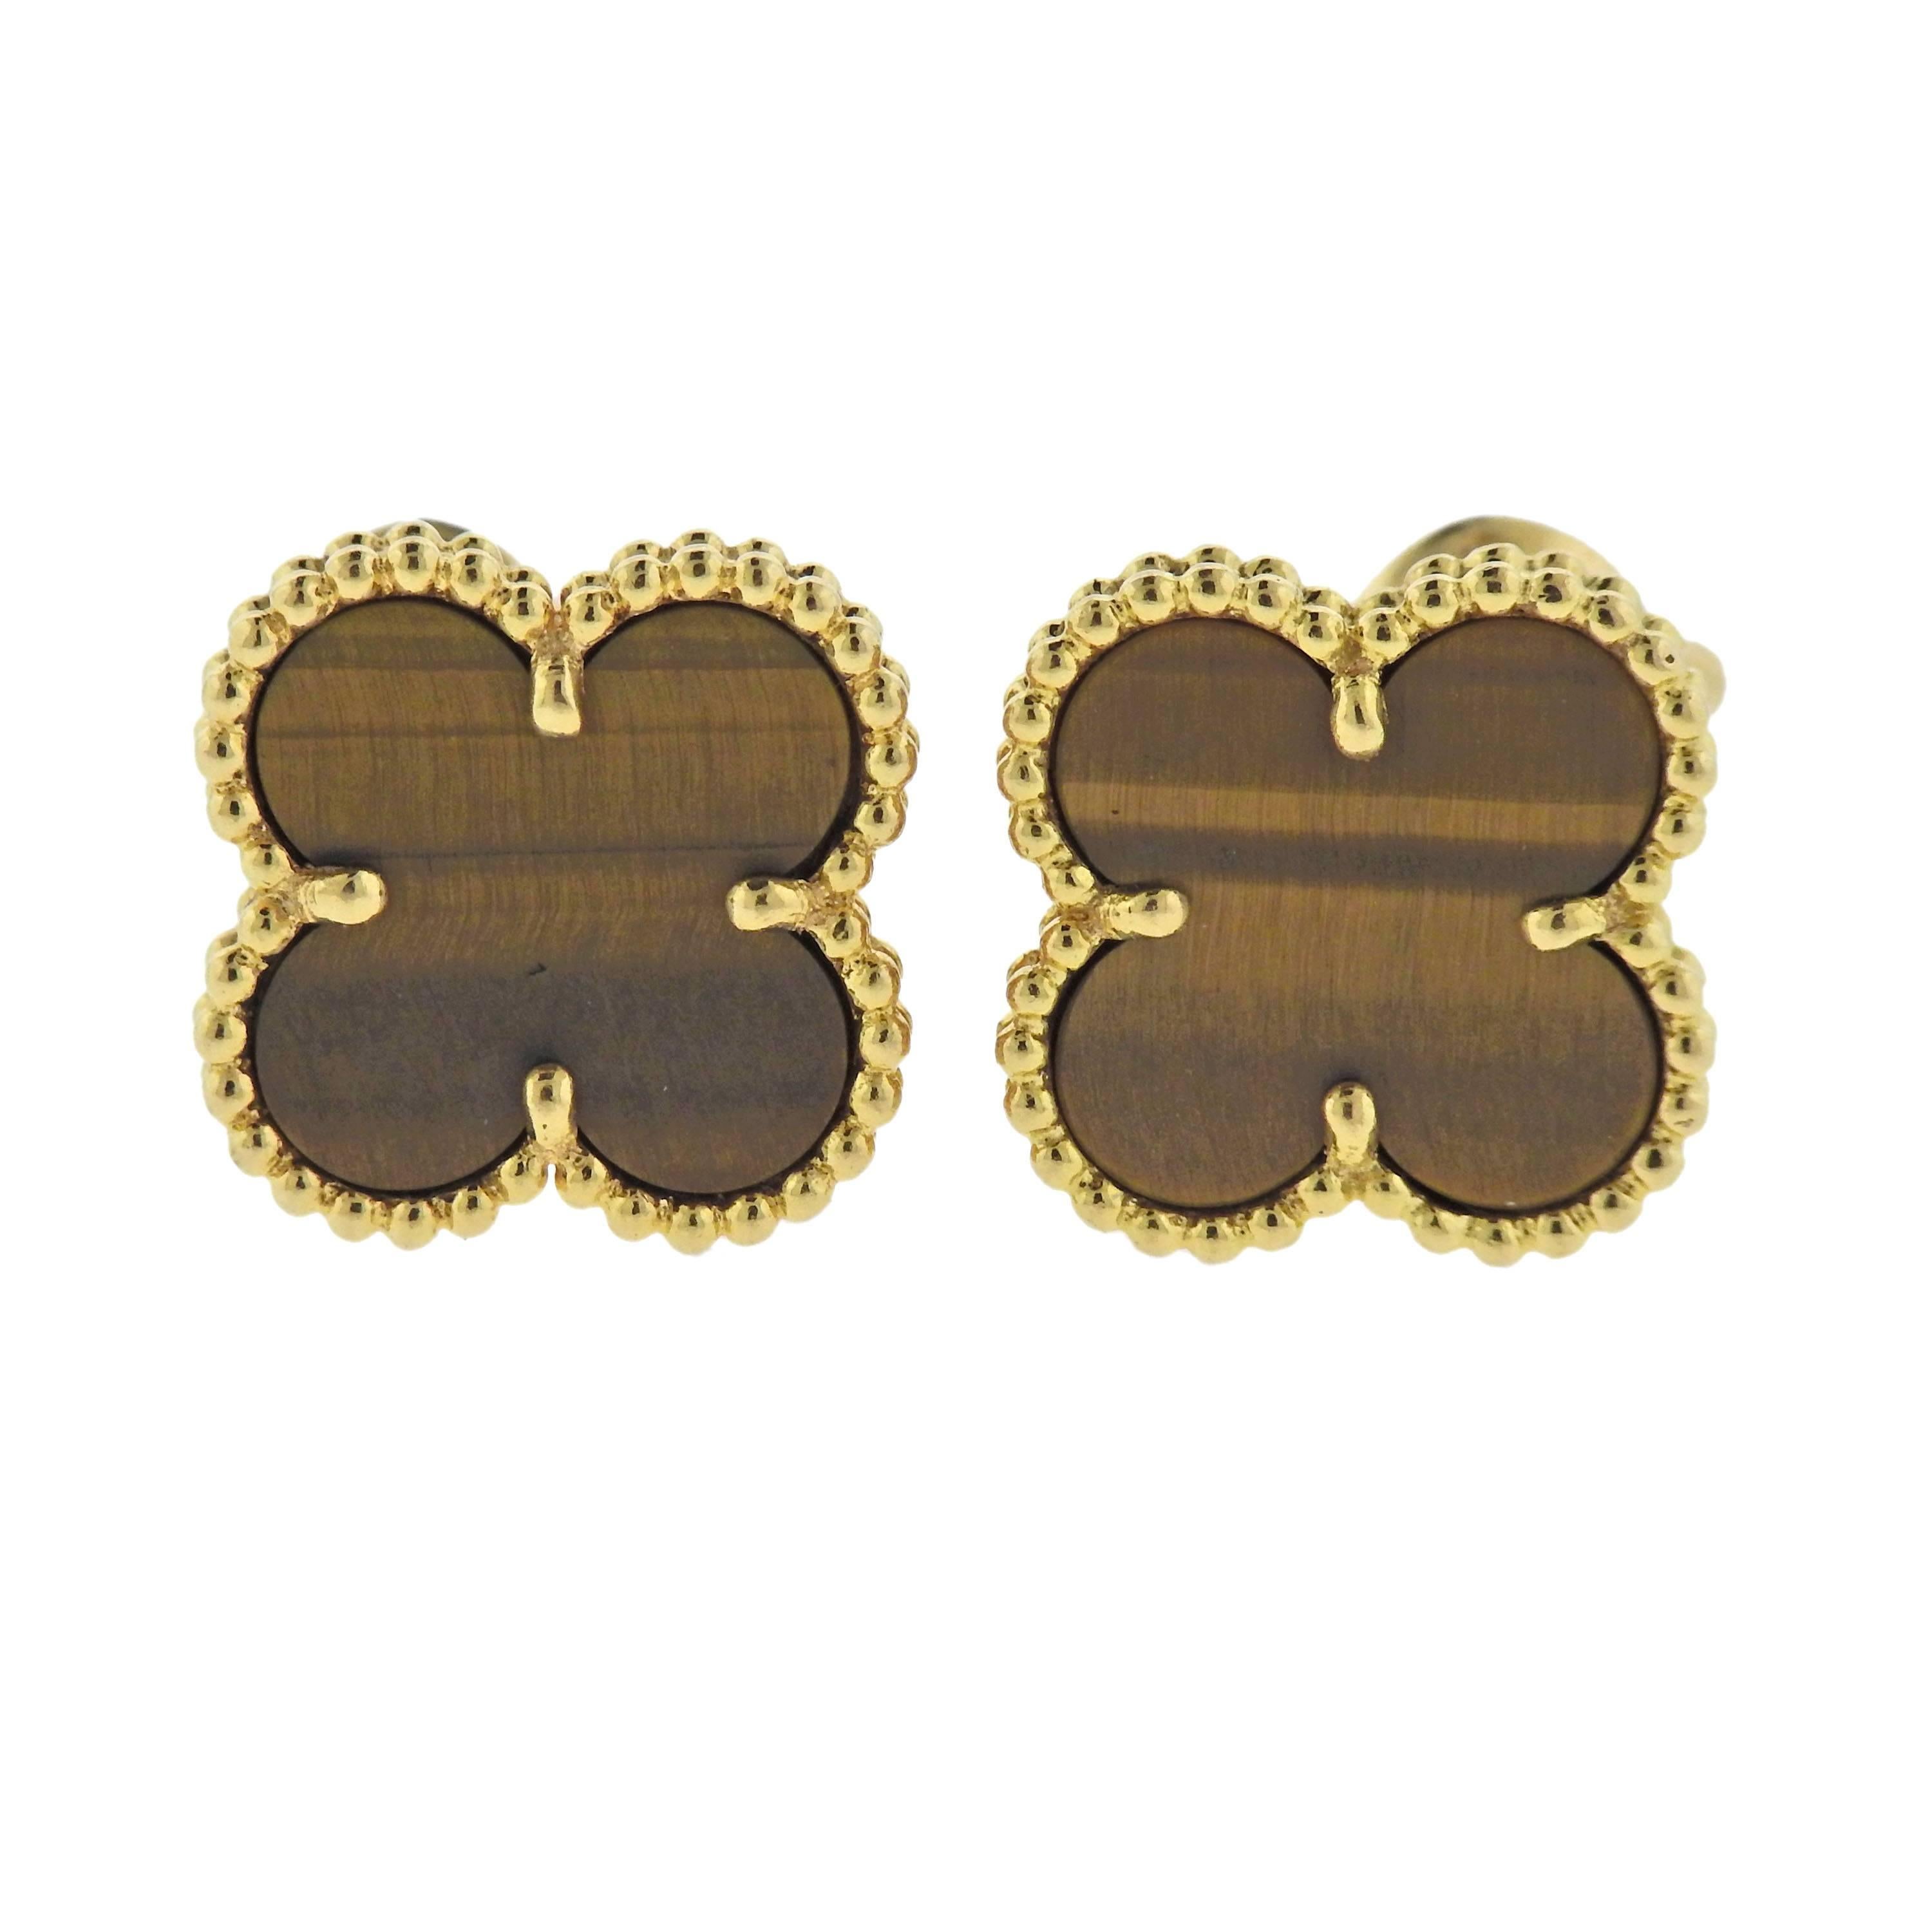  Pair of 18k yellow gold Vintage Alhambra earrings, crafted by Van Cleef & Arpels, set with tiger's eye. Retail for $4150. Earrings 15mm 15mm, weigh 7.1 grams. Marked: VCA, G750, JB147***.